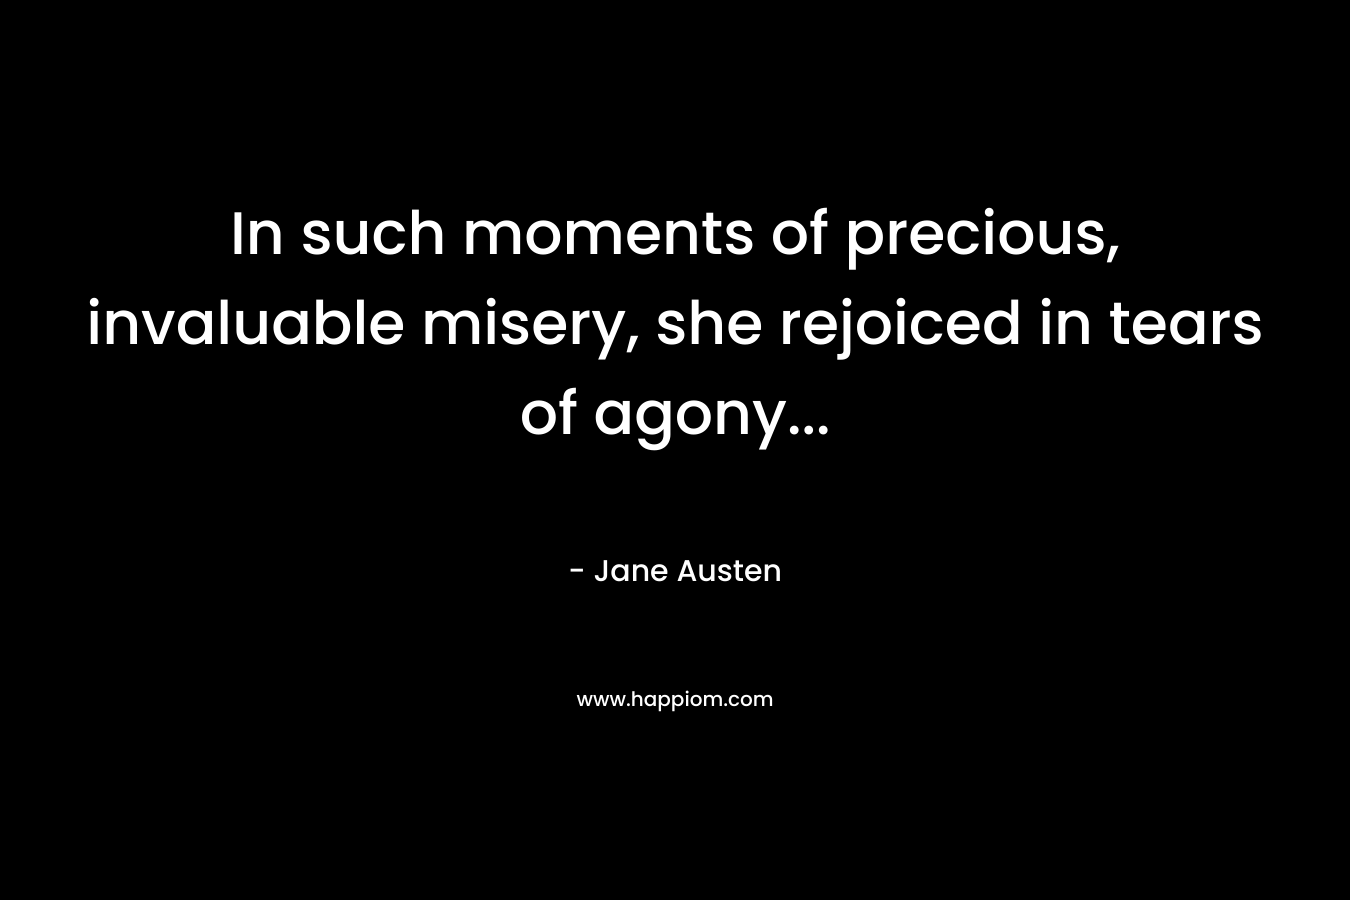 In such moments of precious, invaluable misery, she rejoiced in tears of agony...